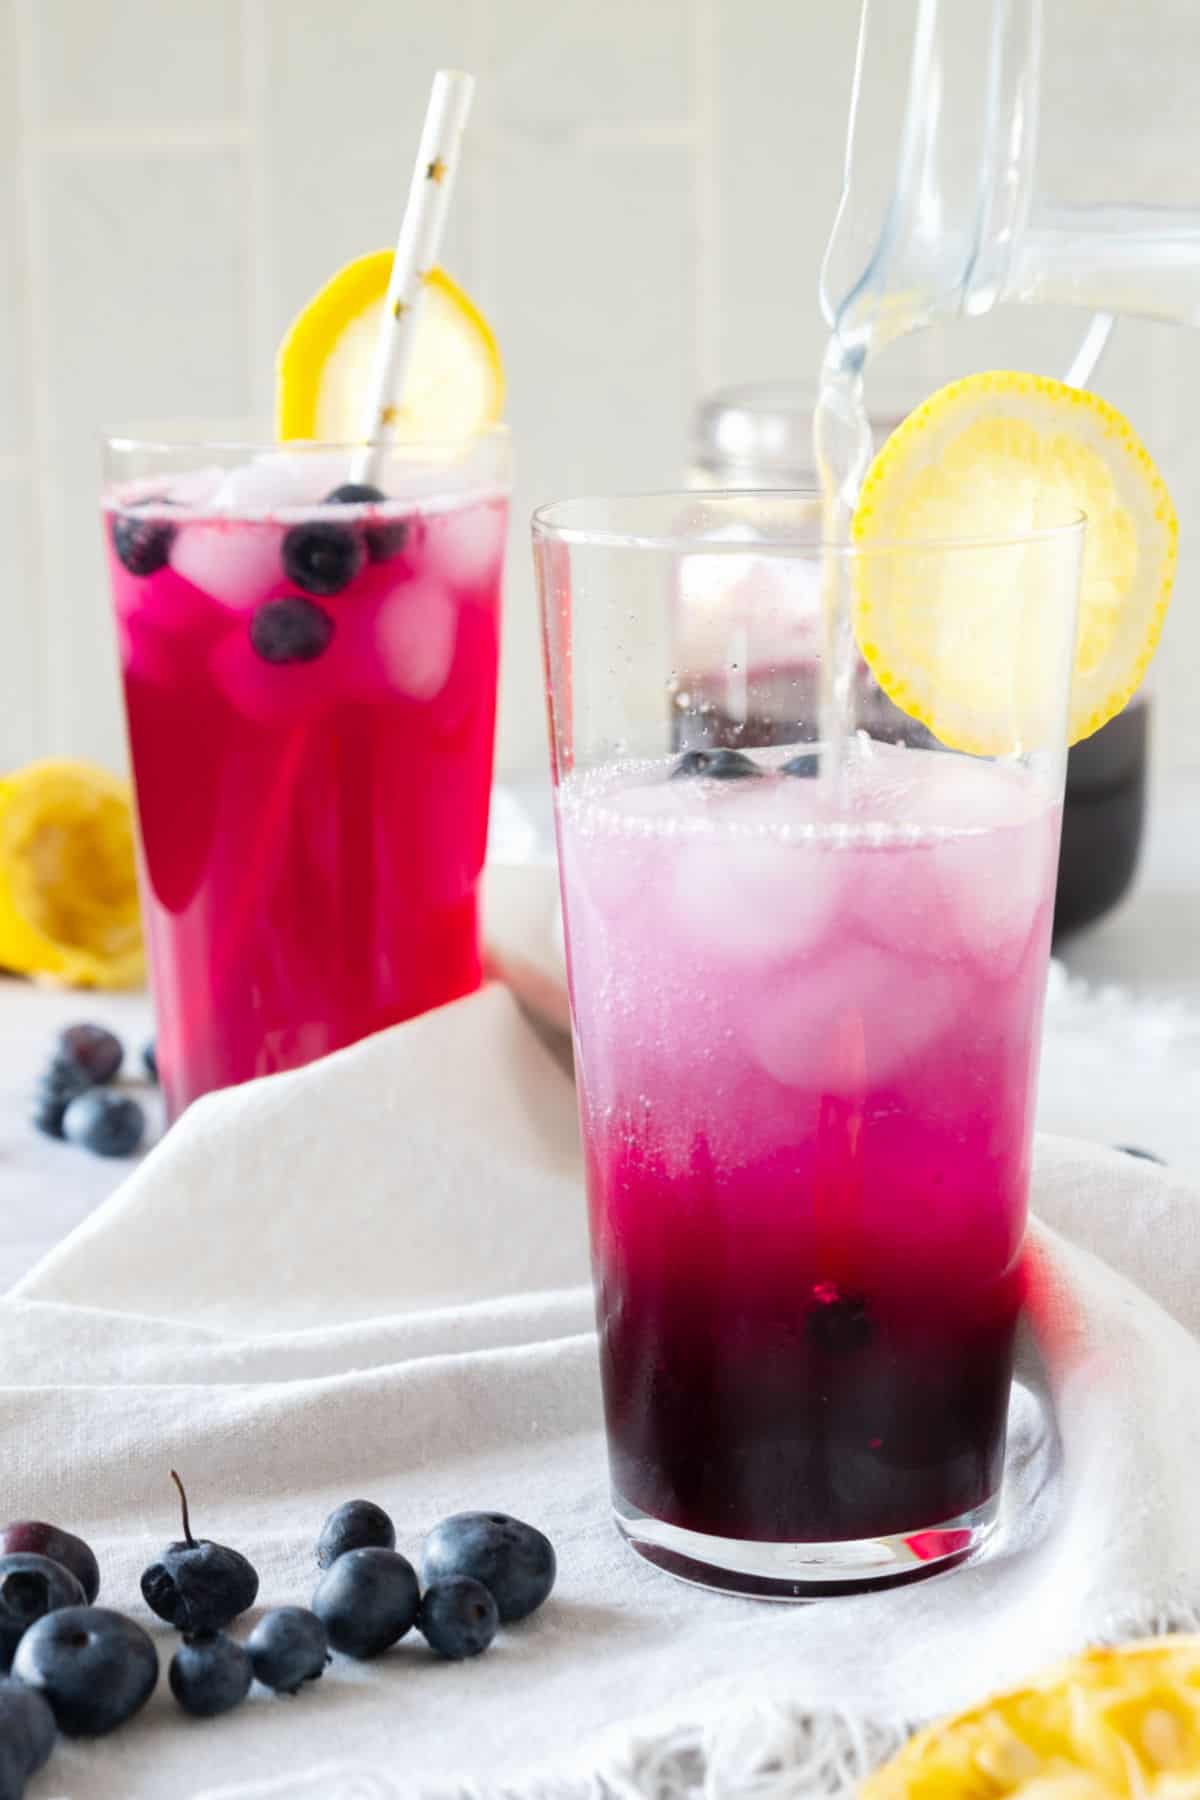 Pouring lemonade mix on tall glass with blueberry syrup, ice and vodka. White cloth as surface. Beige background.